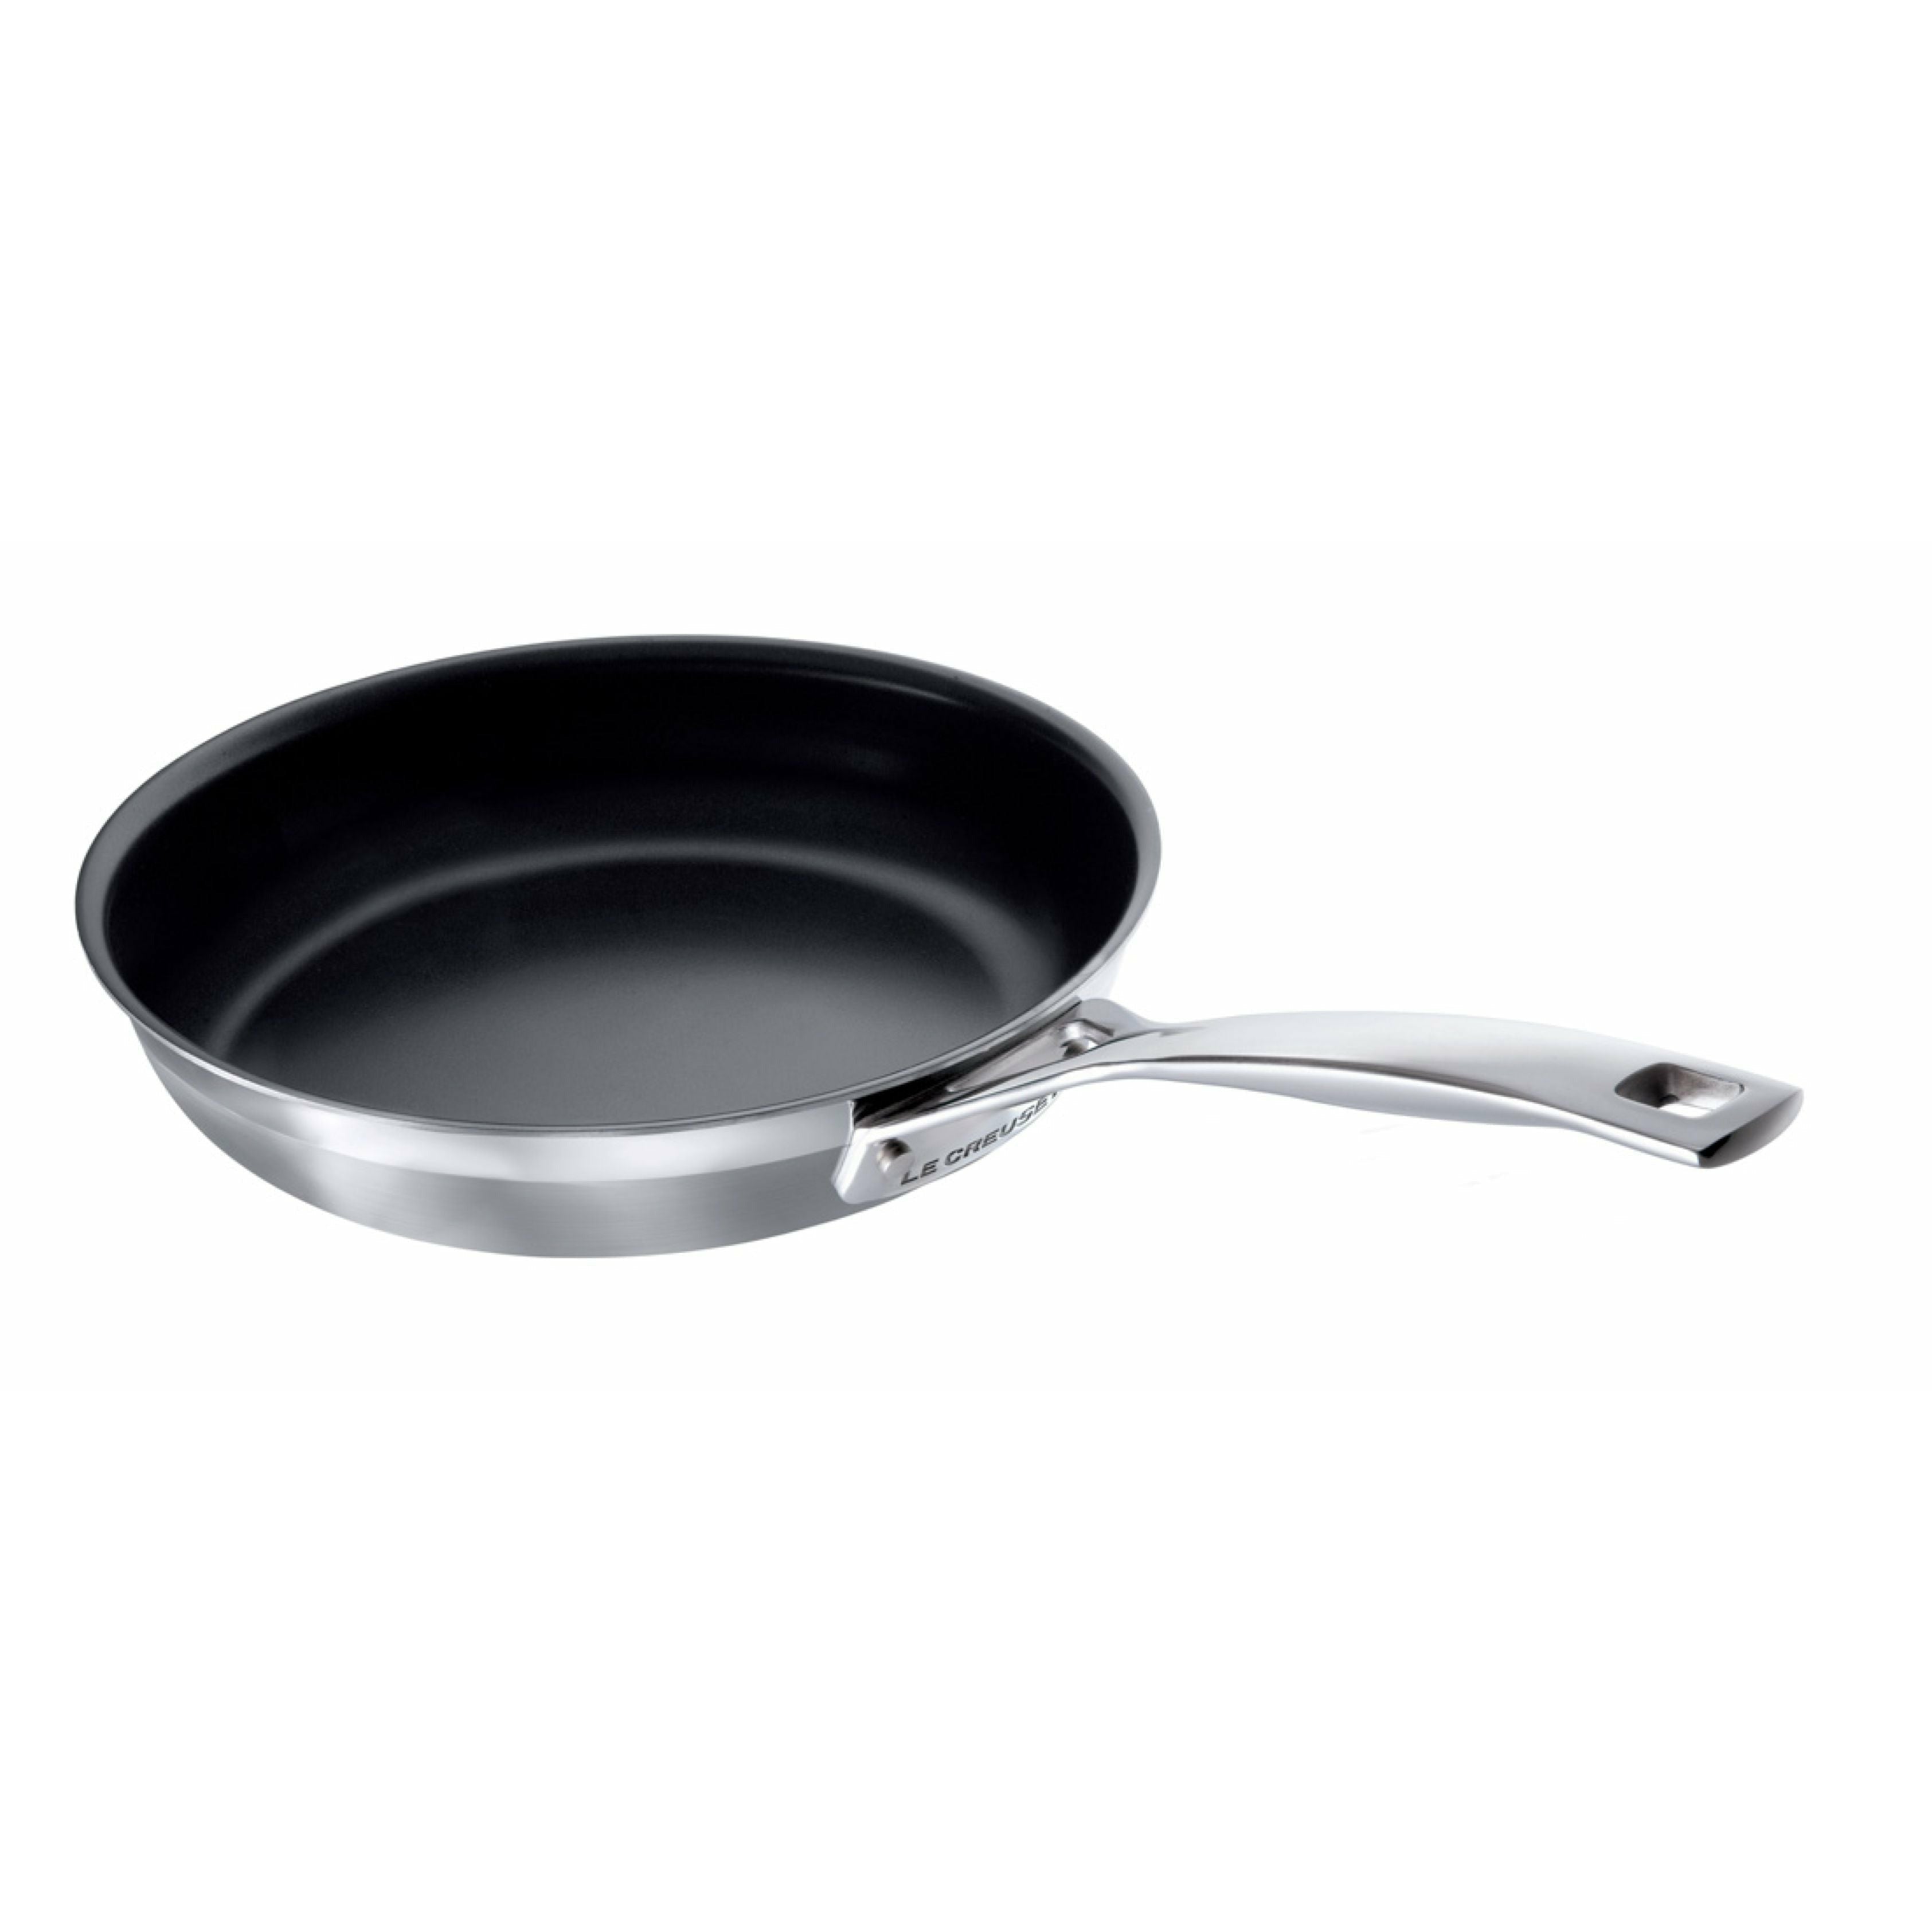 Le Creuset 3 Ply Stainless Steel Non Stick Frying Pan, 24 Cm